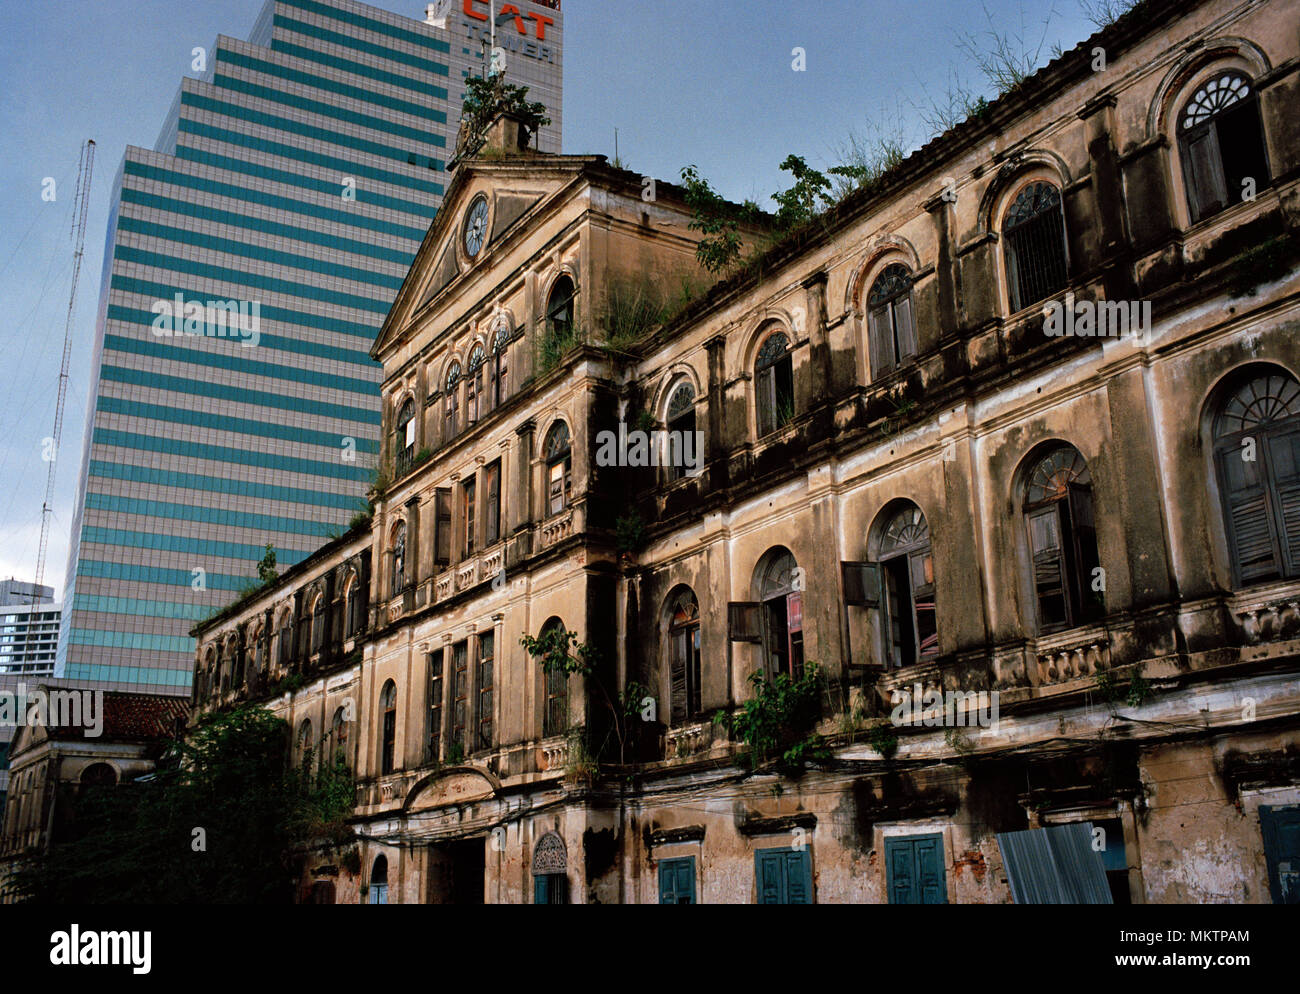 Bangkok History - The Old Customs House in the shadow of the CAT Telecom Tower in Bangkok in Thailand in Southeast Asia Far East. Travel Colonial Stock Photo